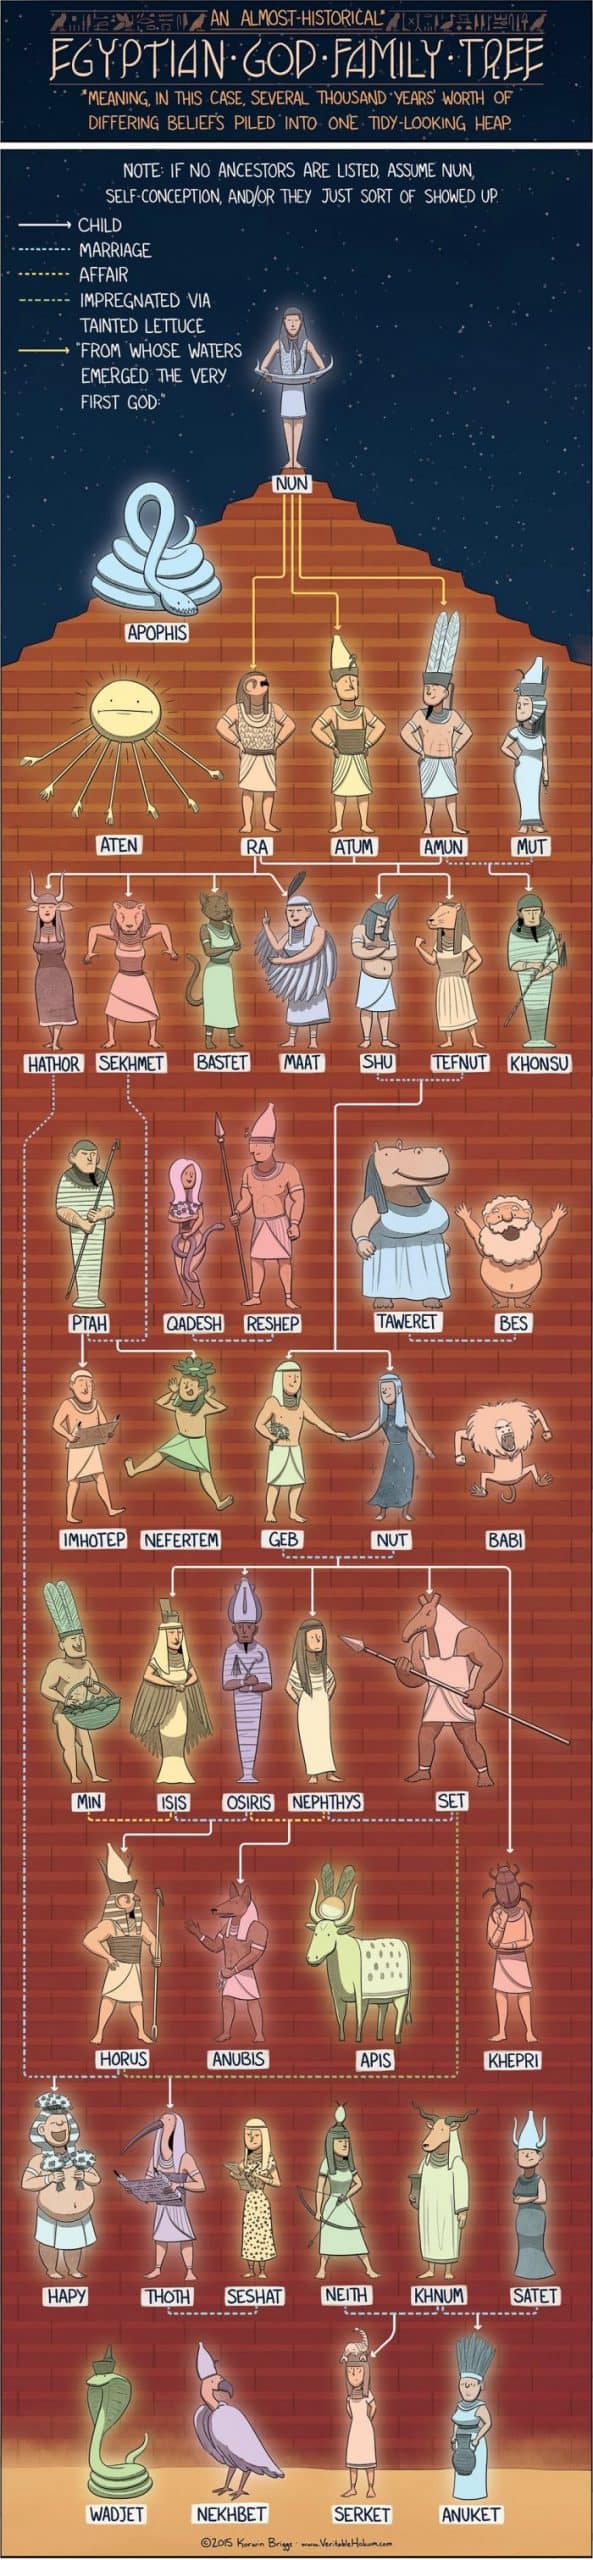 Egyptian gods and their family tree